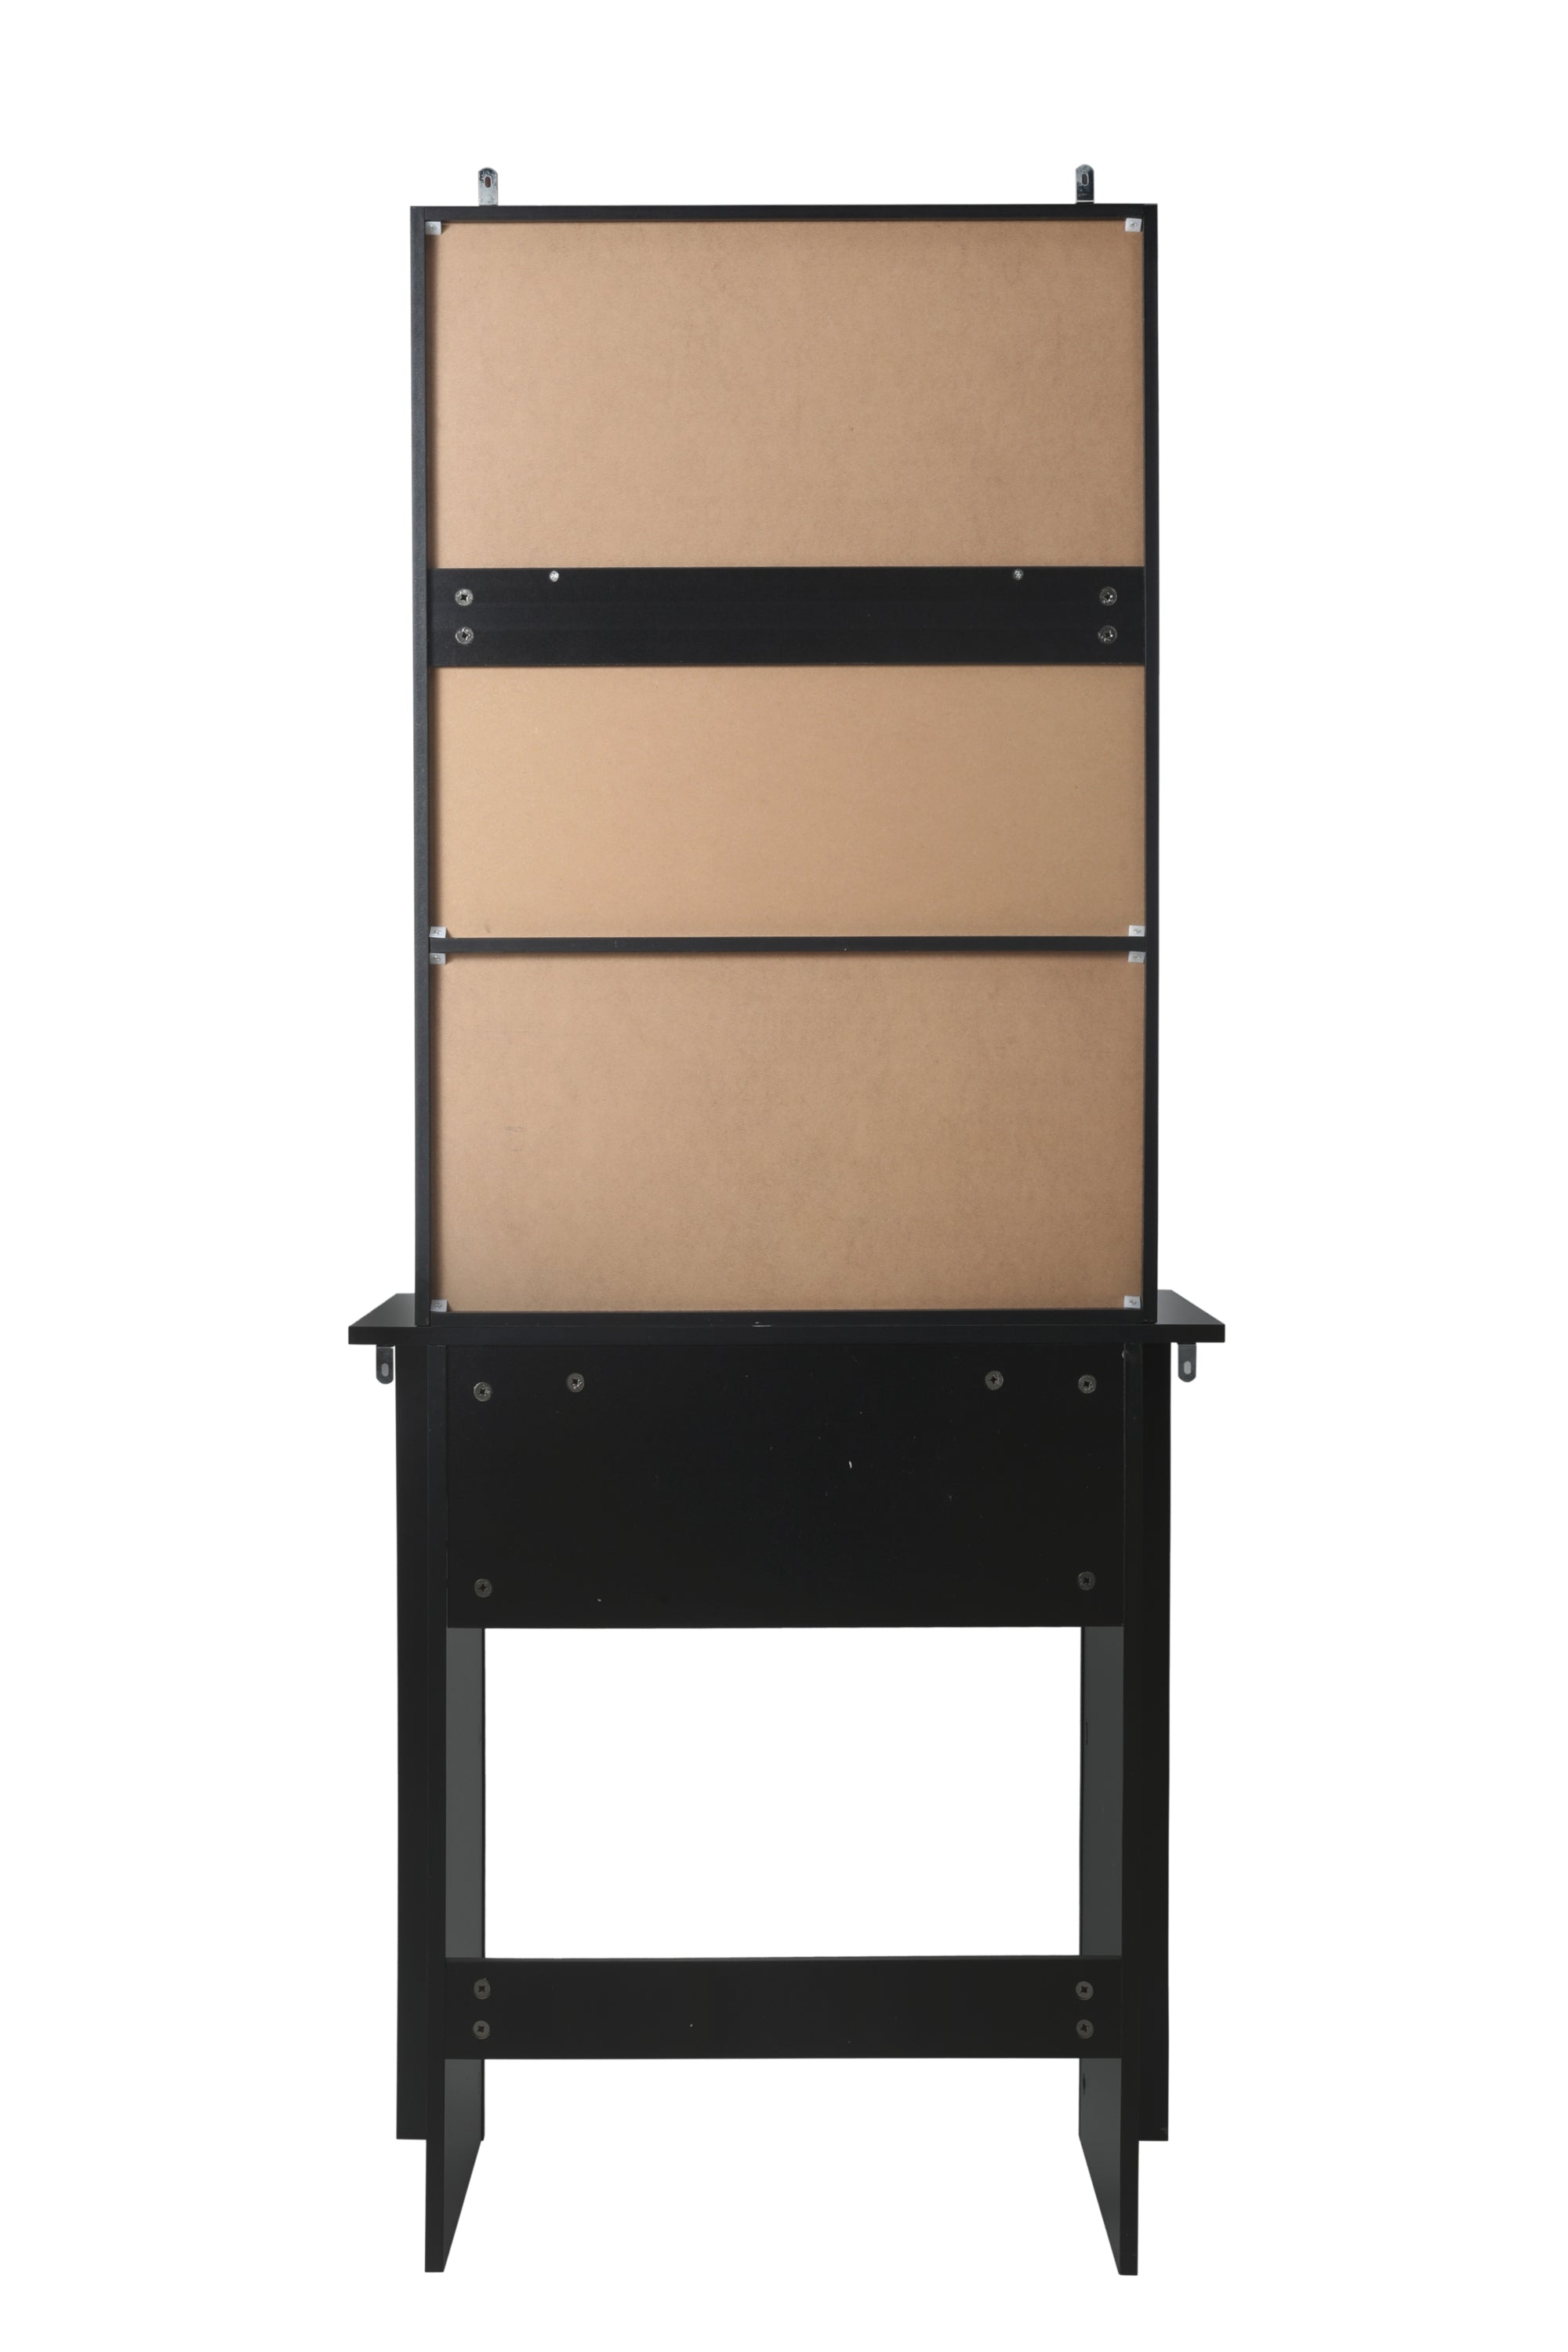 Vanity Desk with Mirror & Stool, Black Makeup Table with Storage Shelves & Drawer, Vanity Set for Girls Women